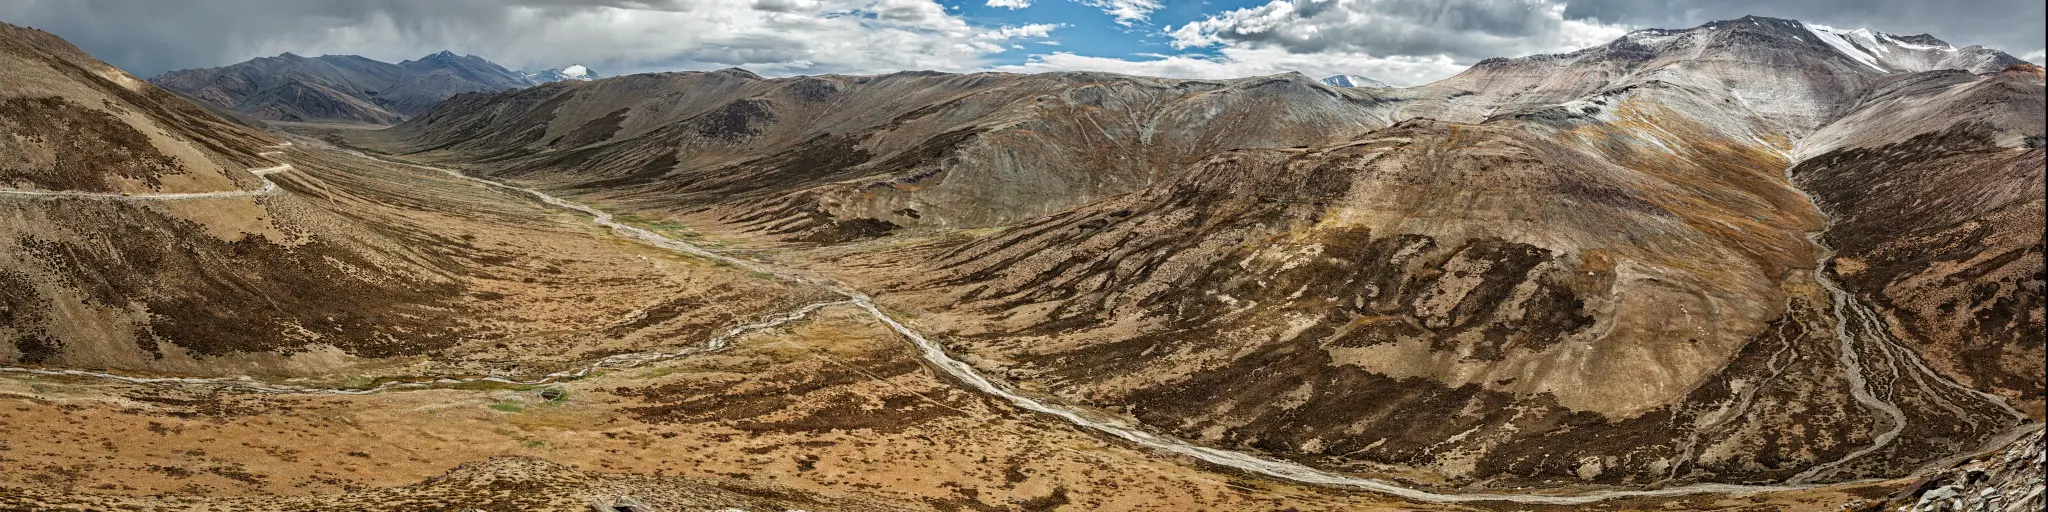 The dramatic landscape of one of the highest roads in the world - the Tangla La pass in the Ladakh region of Kashmir, India